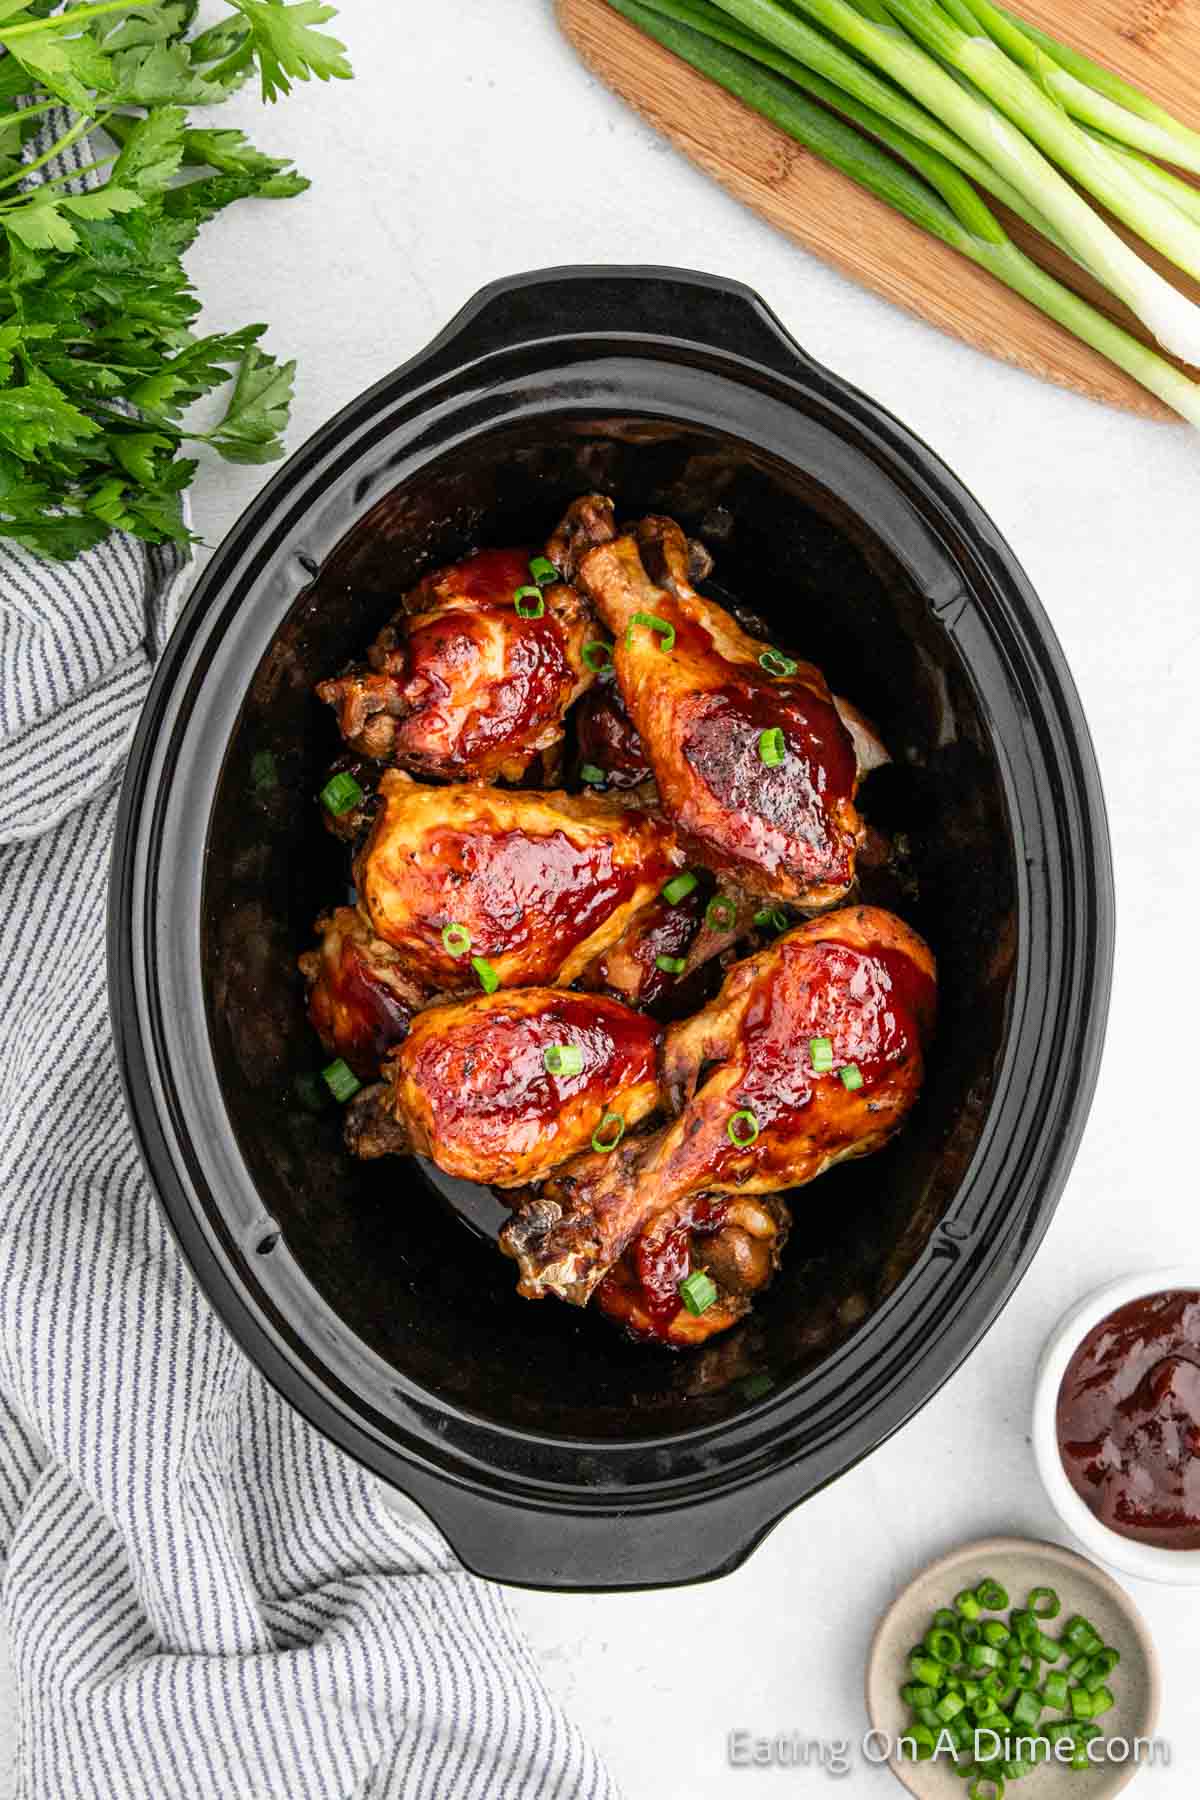 A close-up view of a crock pot filled with BBQ ranch drumsticks, garnished with chopped green onions. The slow cooker is on a white surface, surrounded by fresh parsley, green onions, and a striped kitchen towel. A small bowl of sauce is next to the cooker.